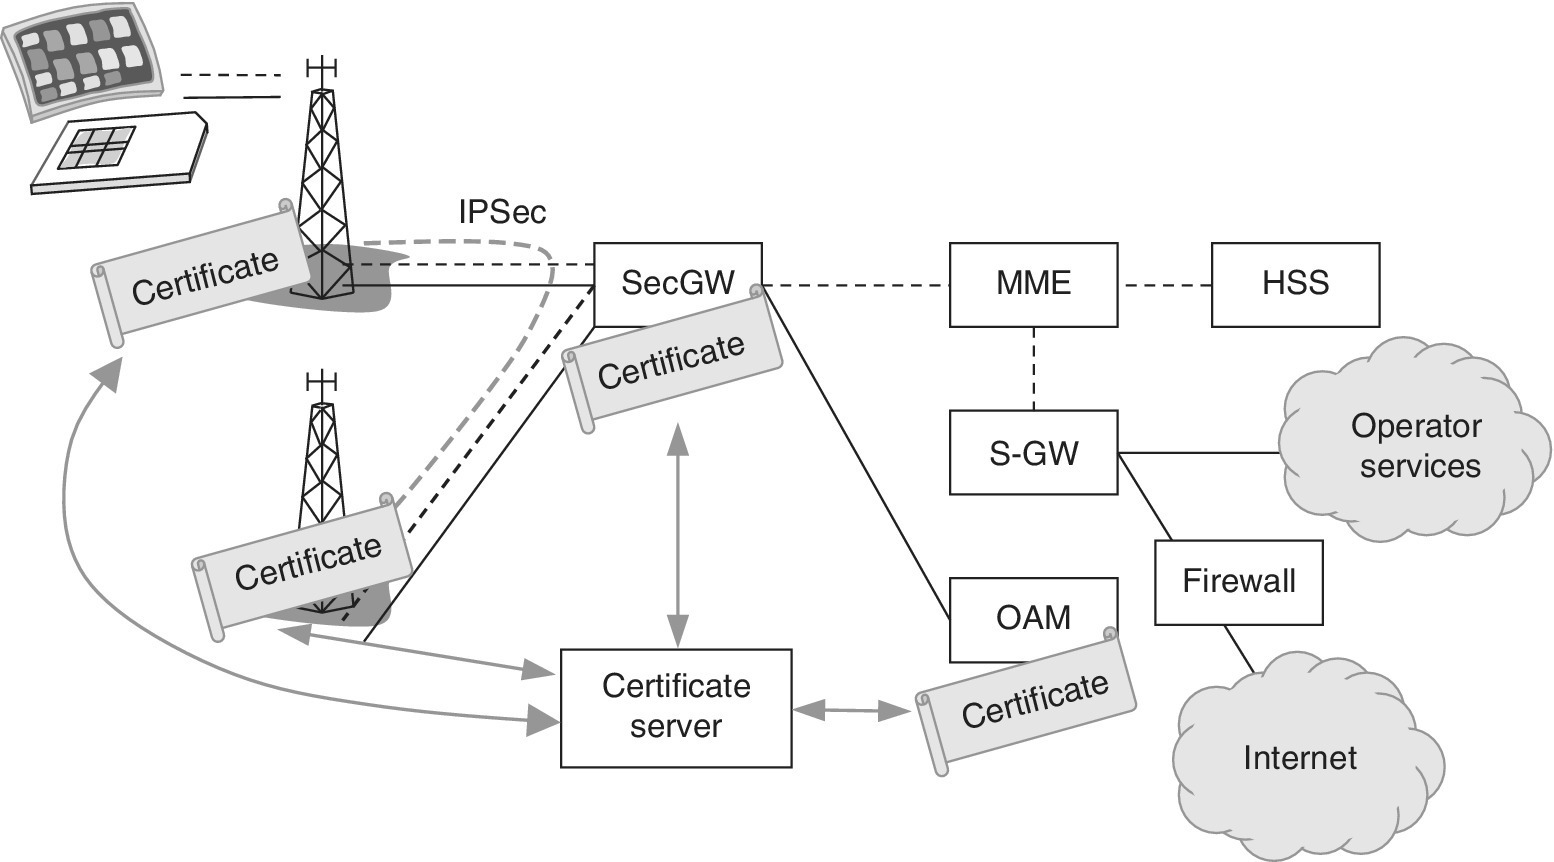 Schematic of the architecture of the combined IPSec and PKI, with light-dotted line indicating signalling, solid line representing user plane data flow, and thick-dotted line symbolizing the IPSec tunnel.